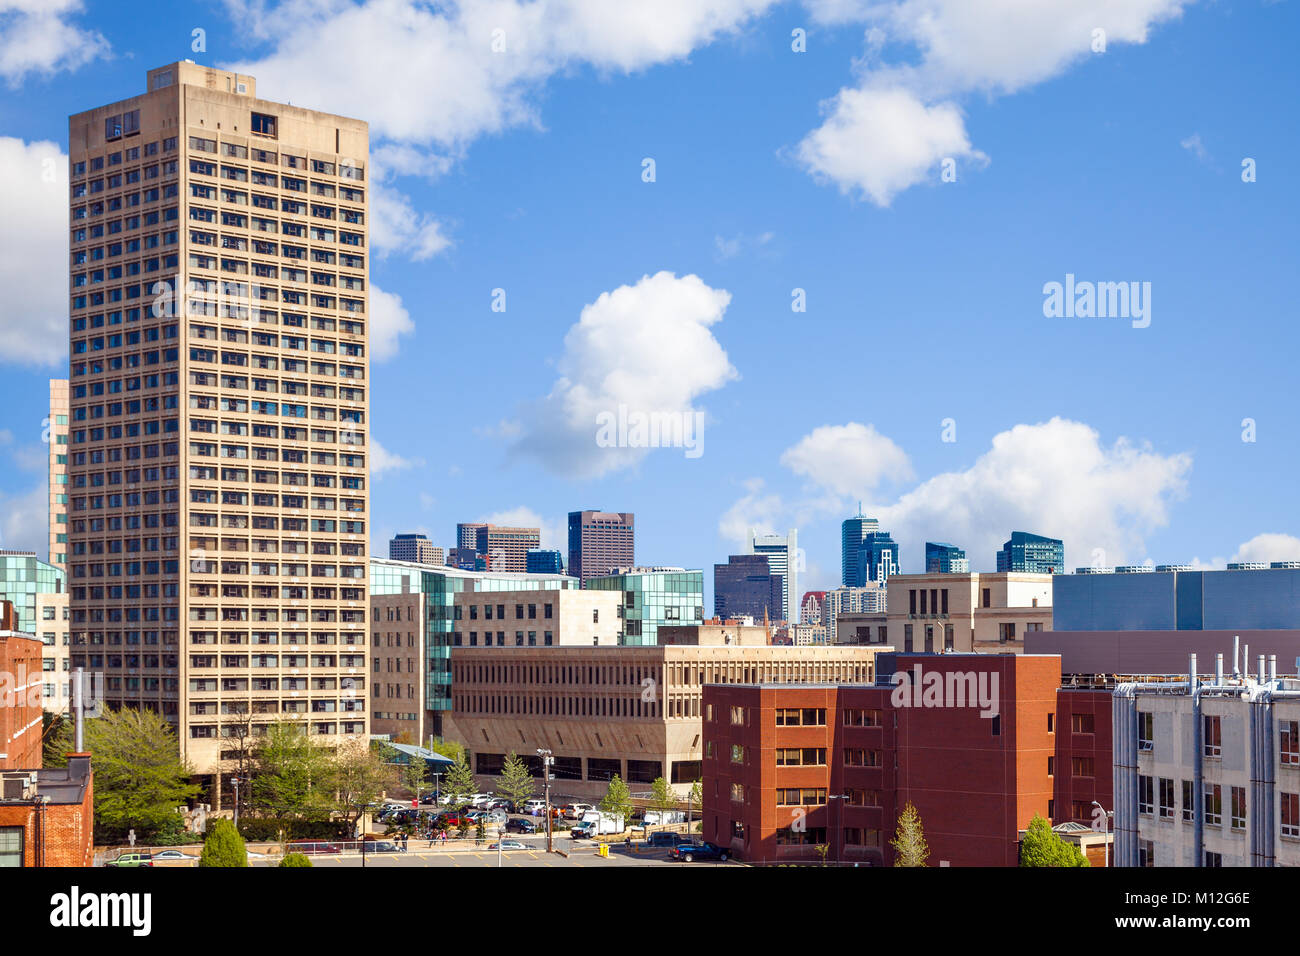 MIT Massachusetts of Technology Kendall Square and skyline view Stock Photo